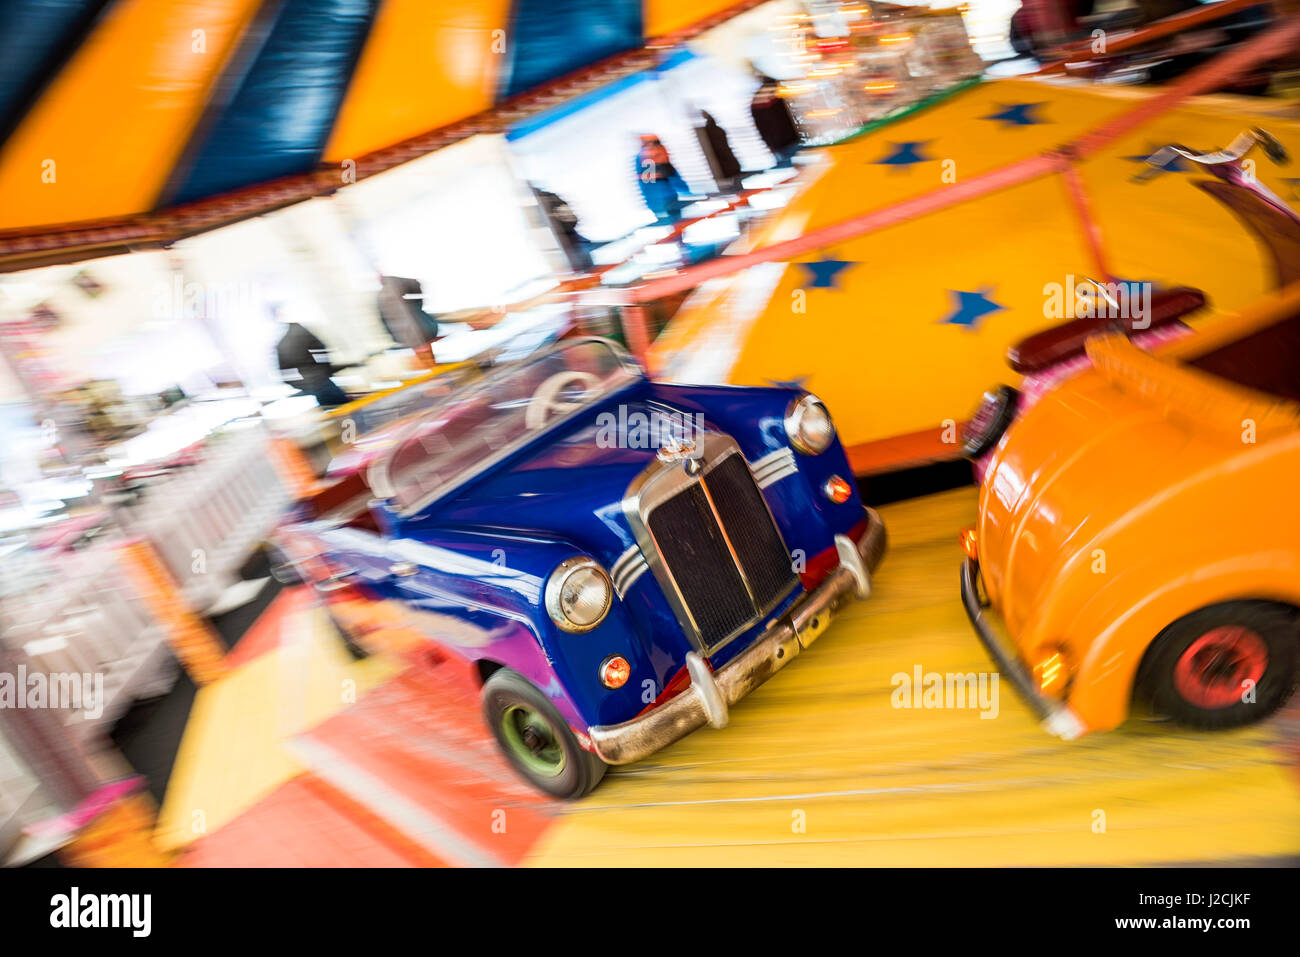 carousel toy cars